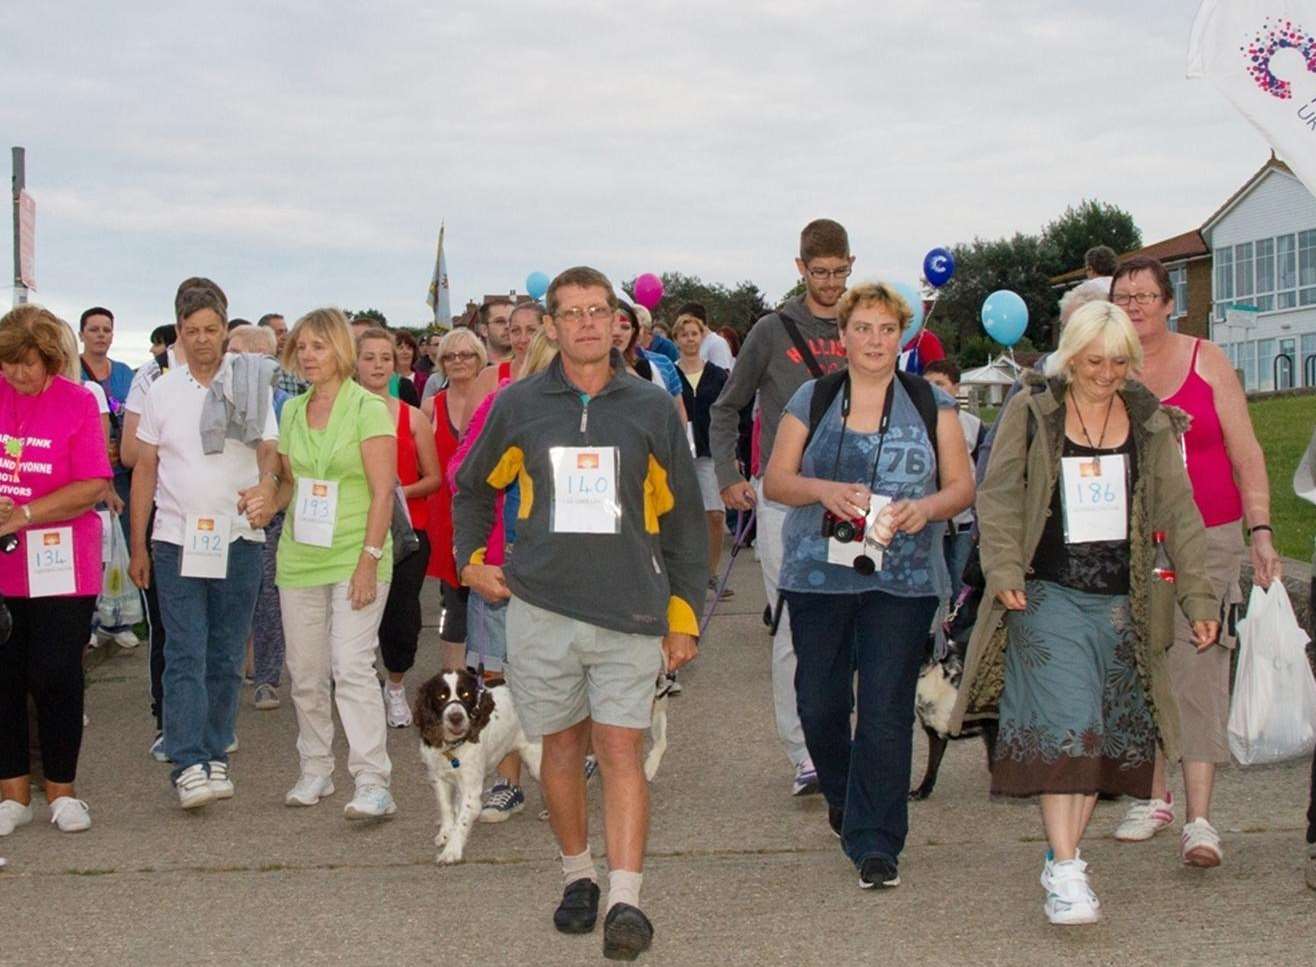 The Sunset Stroll, in aid of Cancer Research UK, leaves from The Leas, Minster